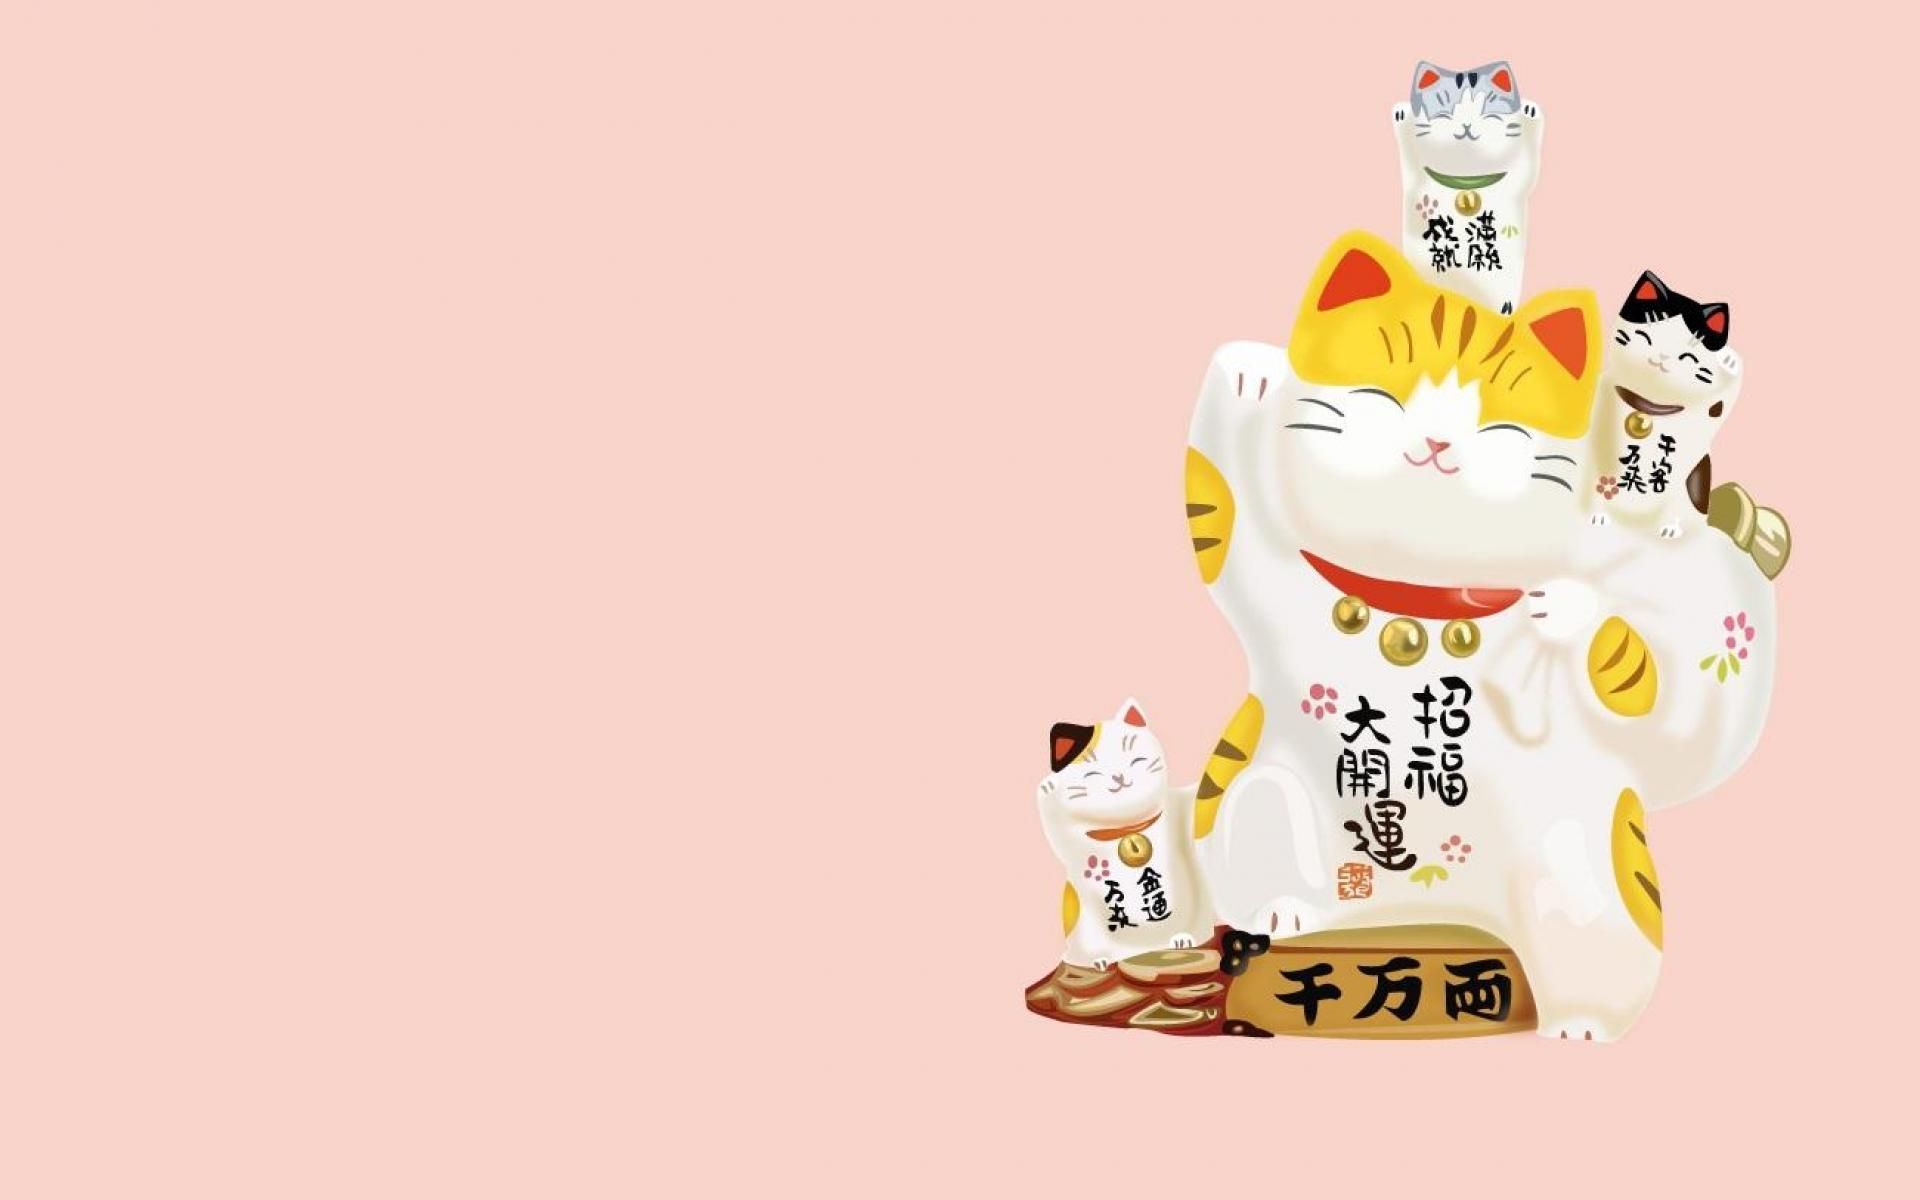 Lucky Cat Background Images HD Pictures and Wallpaper For Free Download   Pngtree